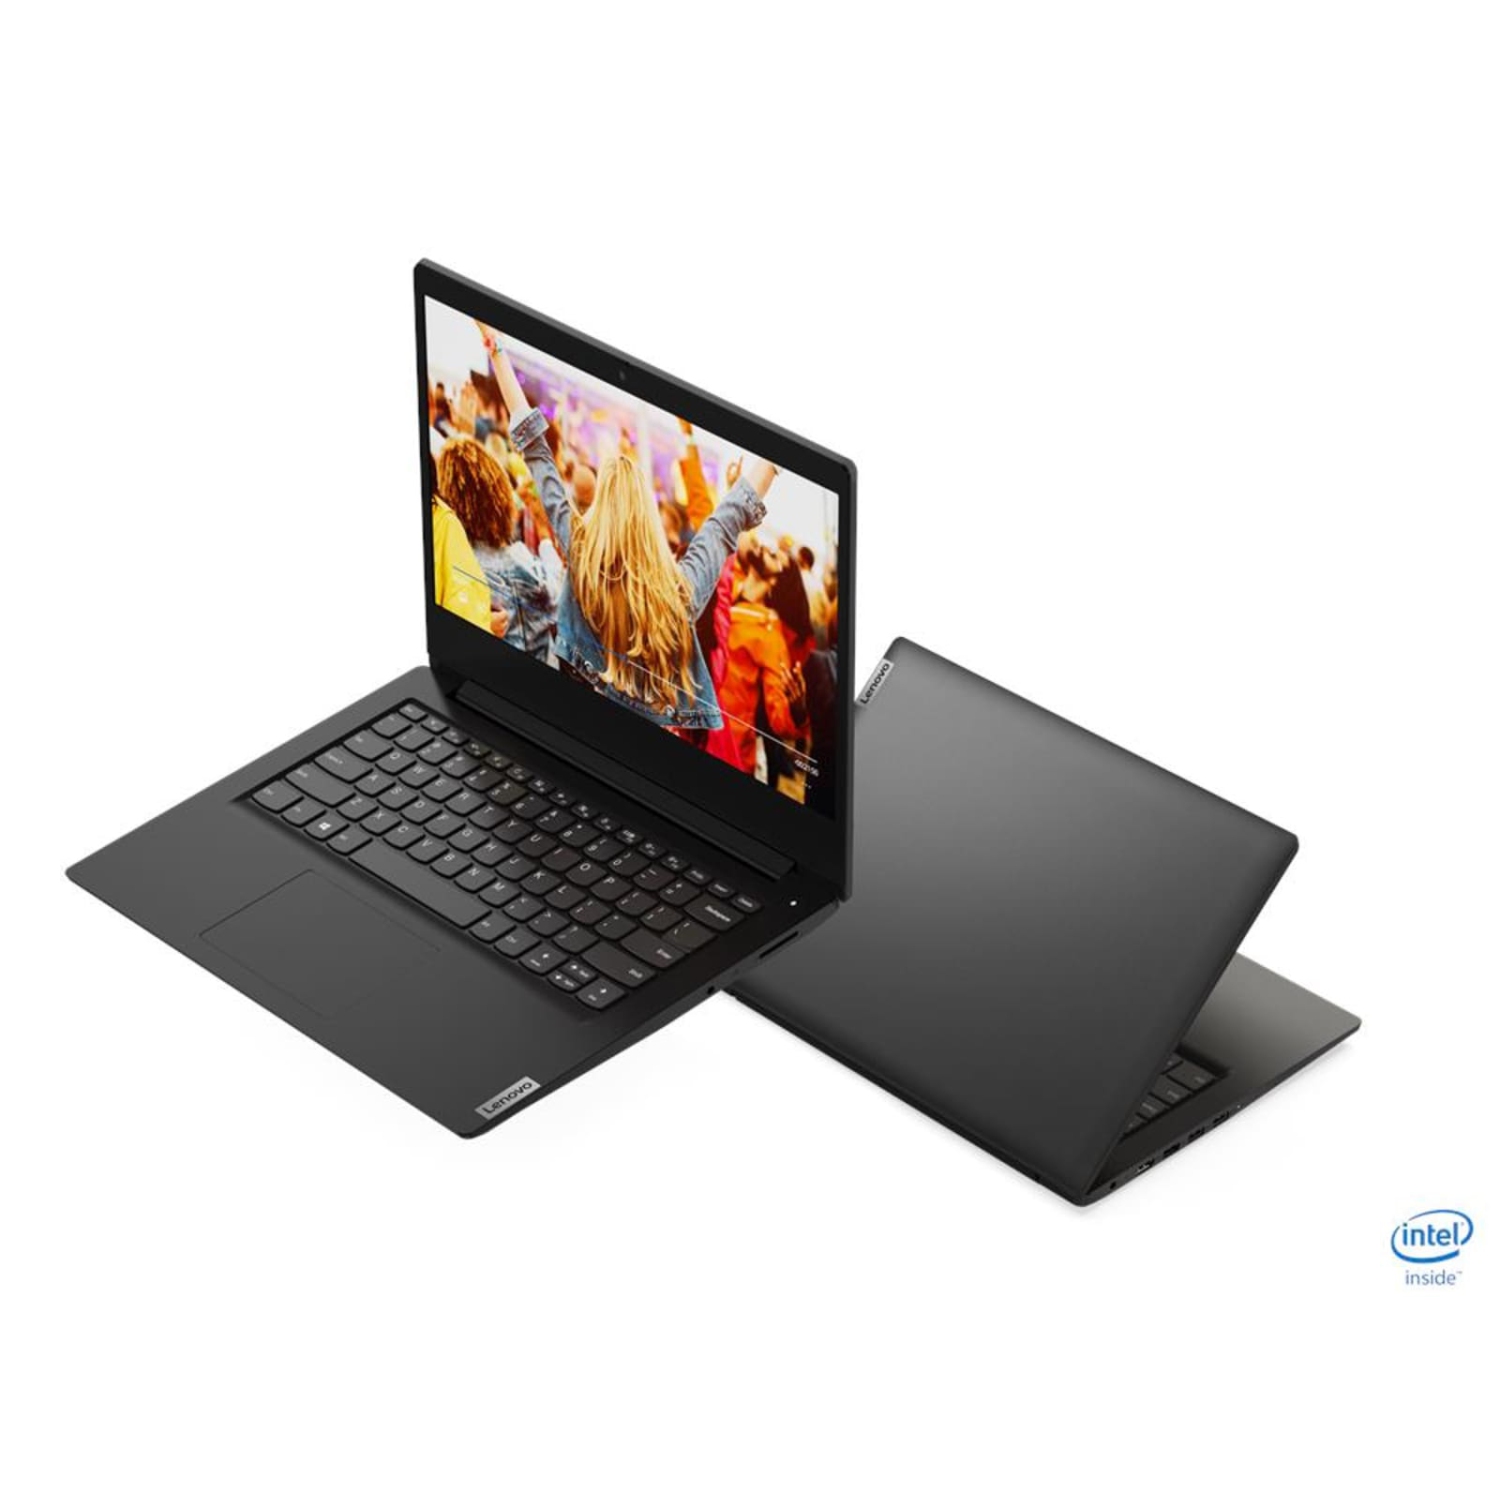 Refurbished (Excellent) Lenovo IdeaPad 3 14ITL05 Laptop | 14" 1920x1080 FHD | Core i3-1115G4 - 128GB SSD Hard Drive - 4GB RAM | 2 cores @ 4.1 GHz Win 11 Home Silver